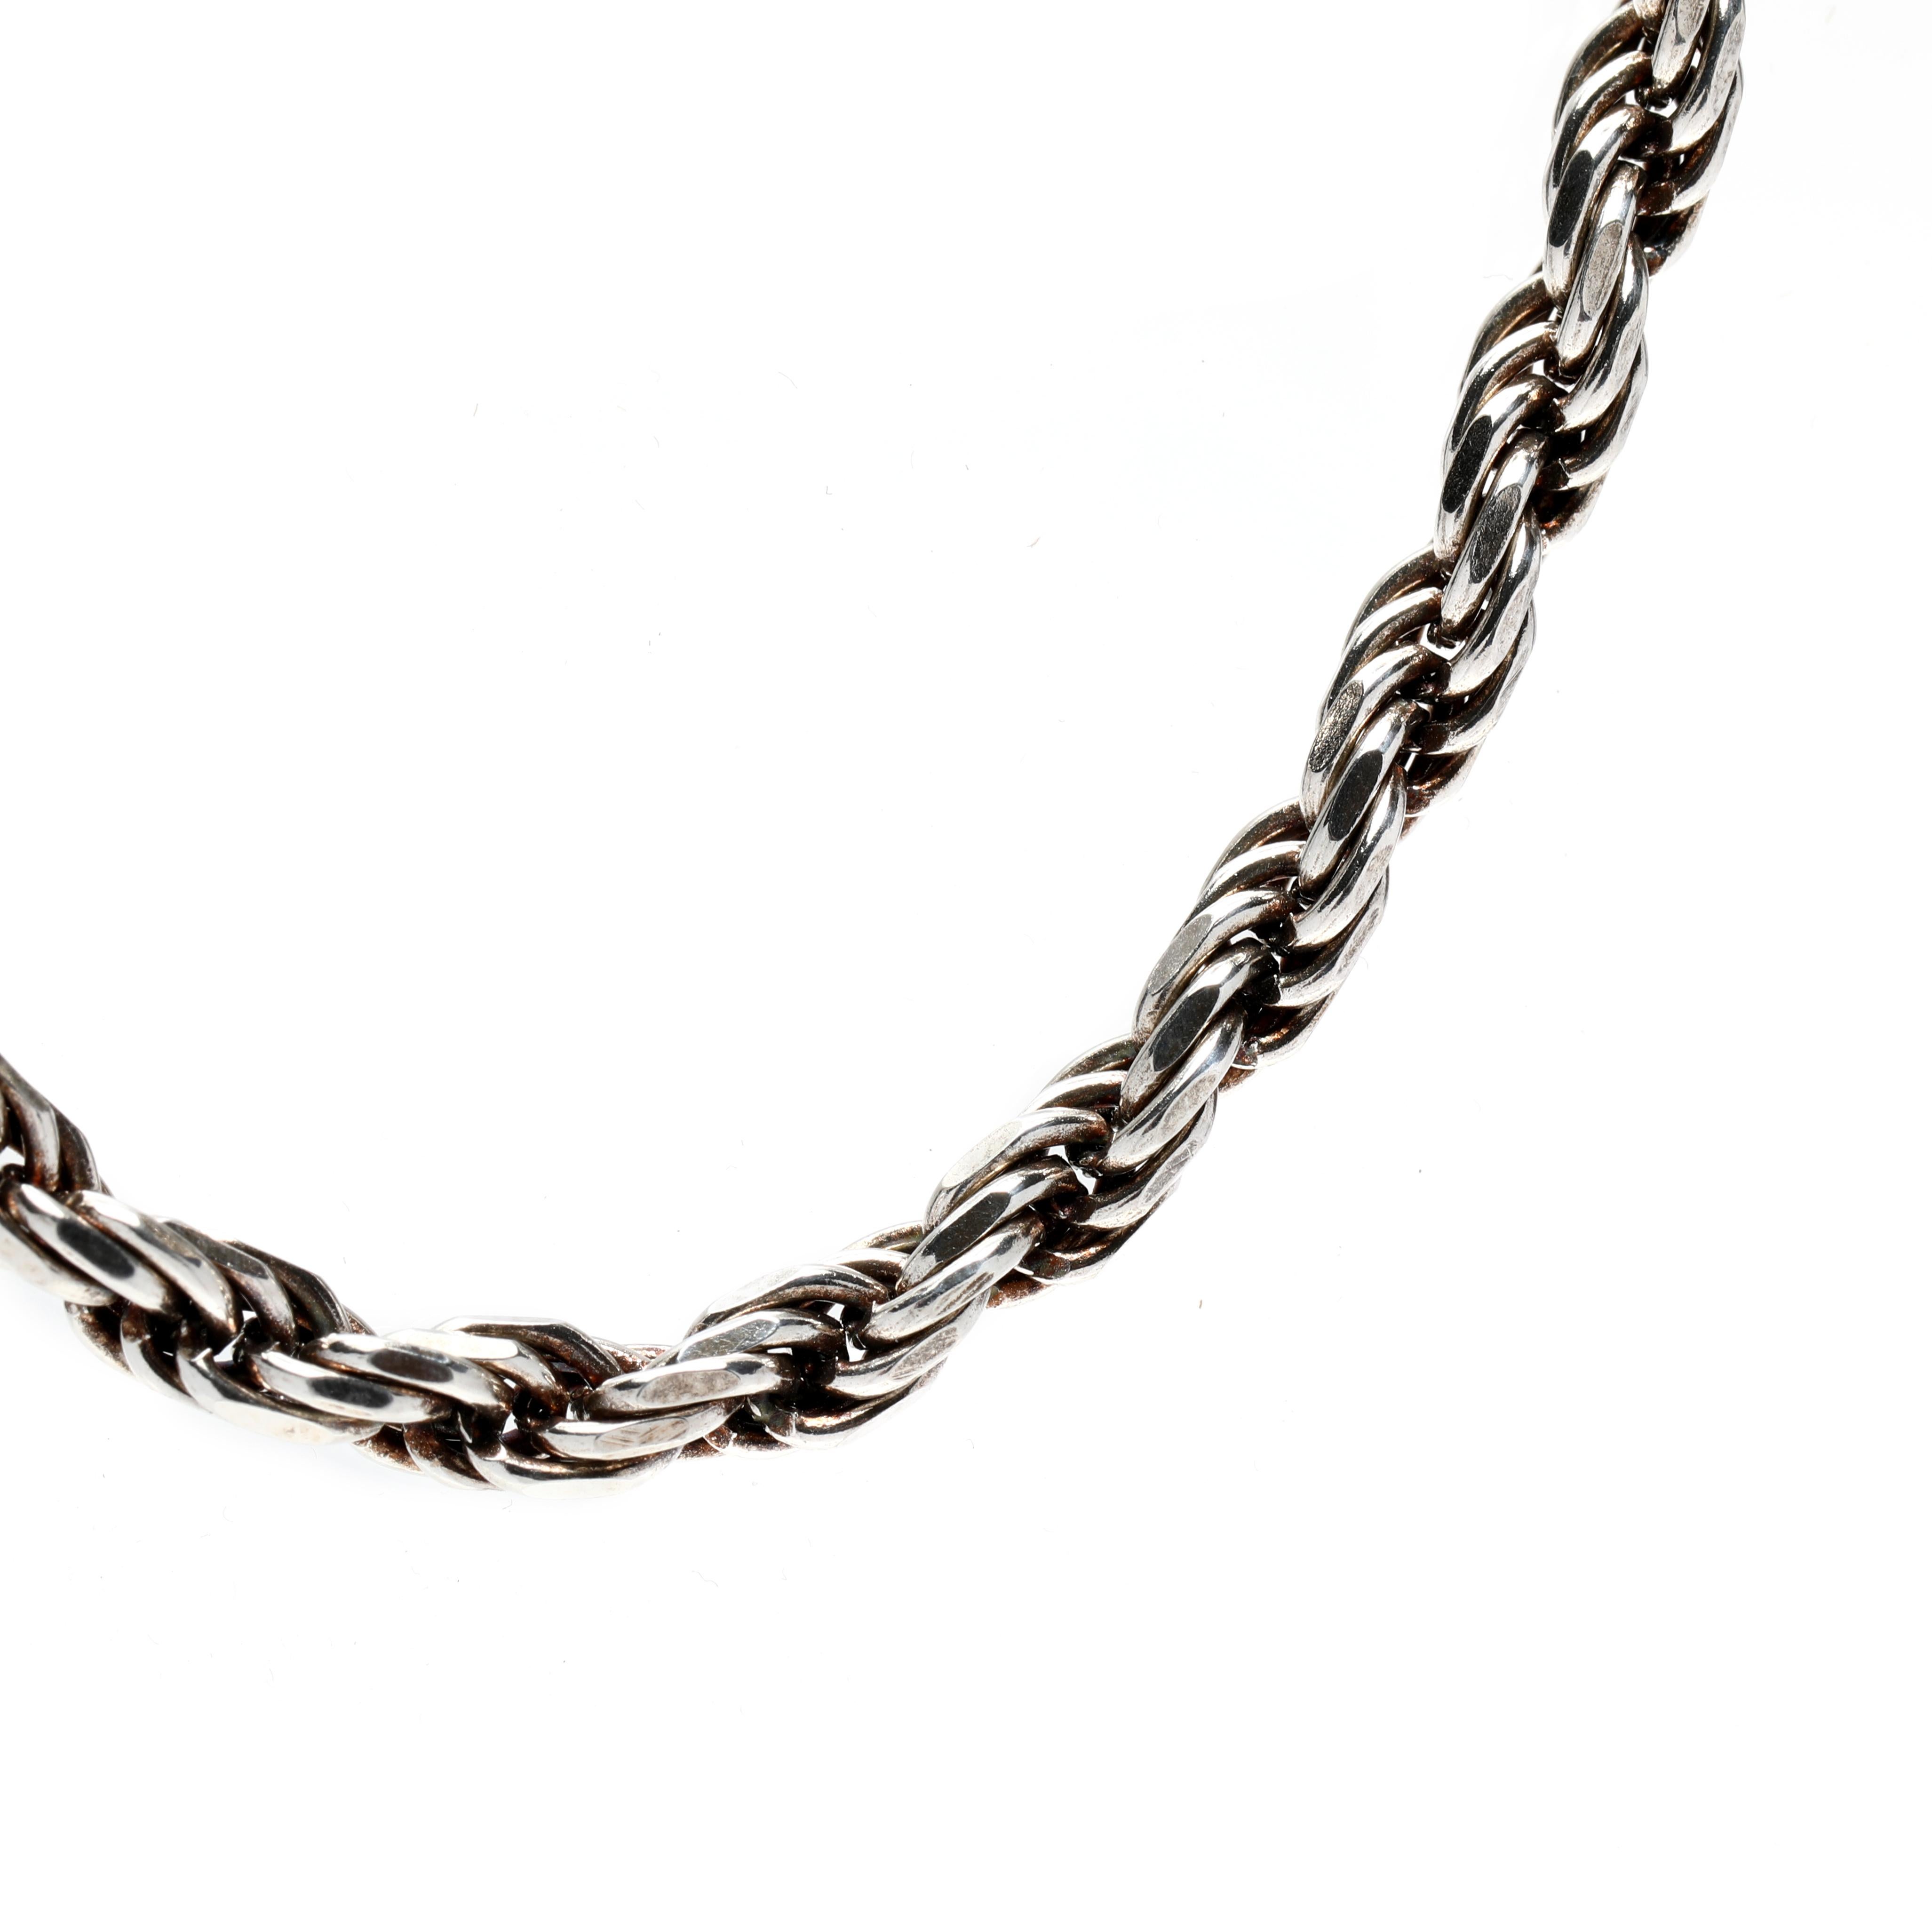 This Italian-made vintage sterling silver rope chain necklace is the perfect accessory for your outfit. The thick, wide rope chain measures 18 inches in length and is blackened silver for a unique look. Crafted from genuine sterling silver, this